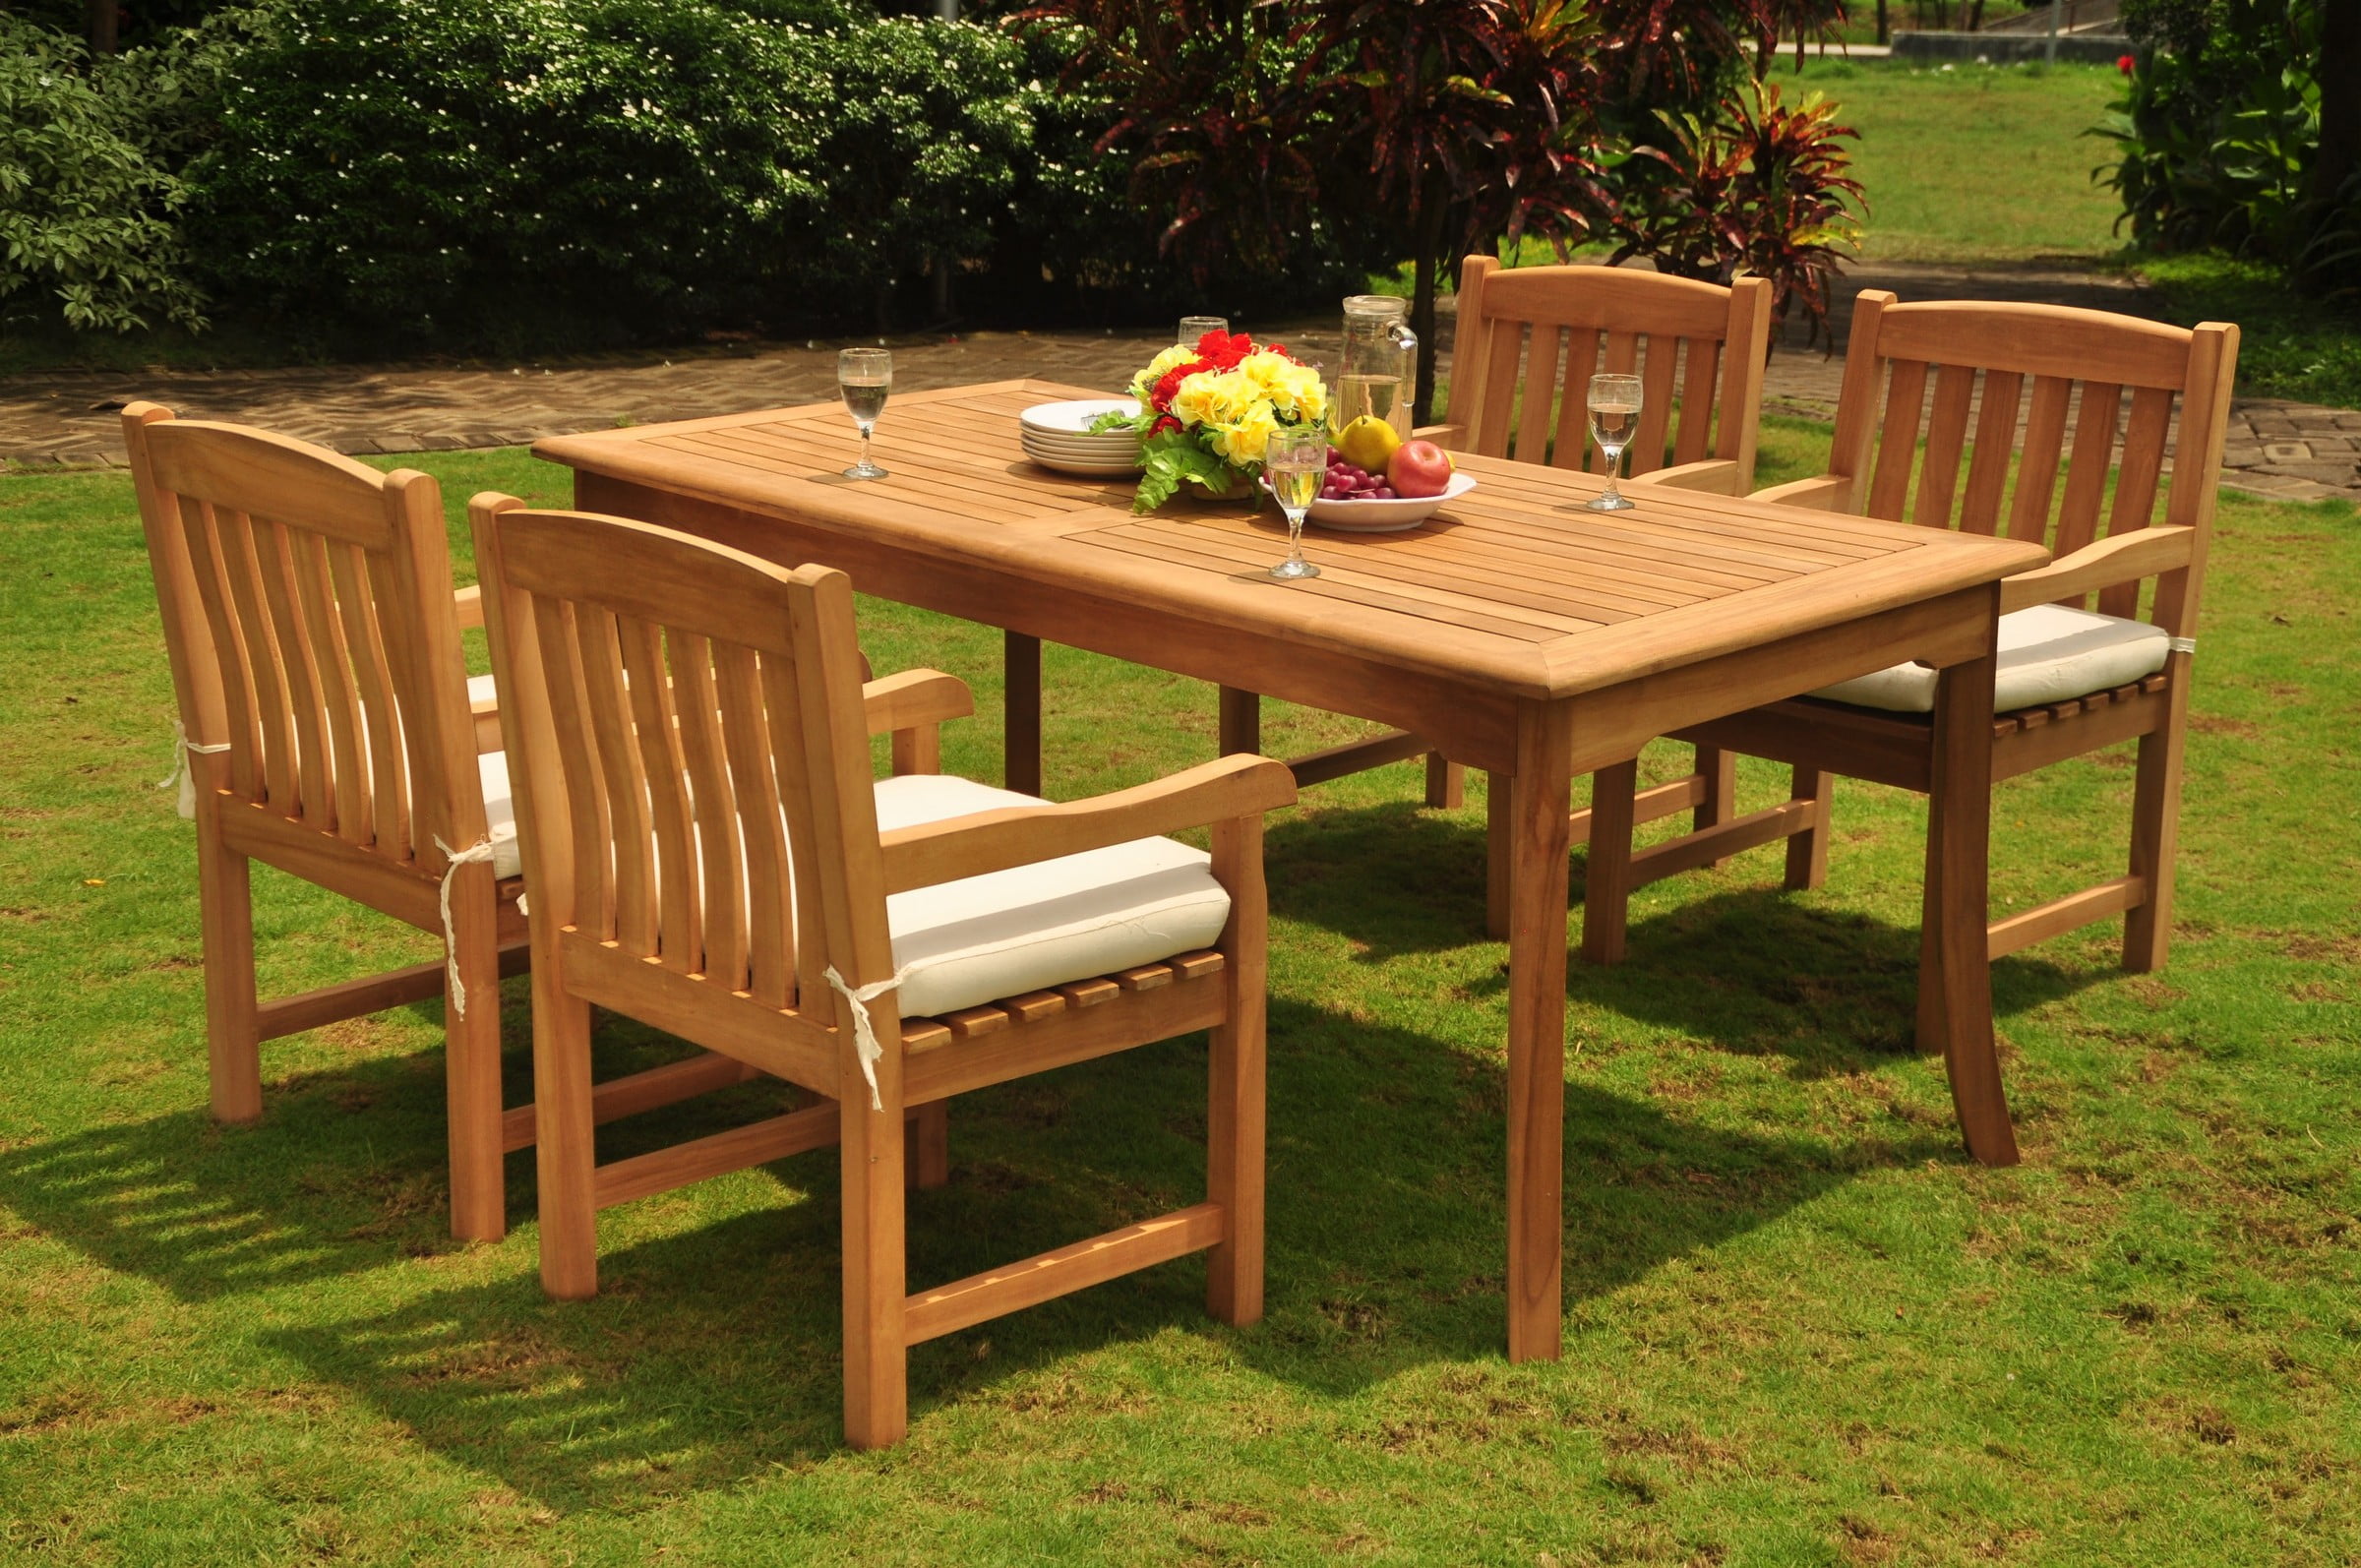 Why Teak Furniture Is A Sustainable Choice